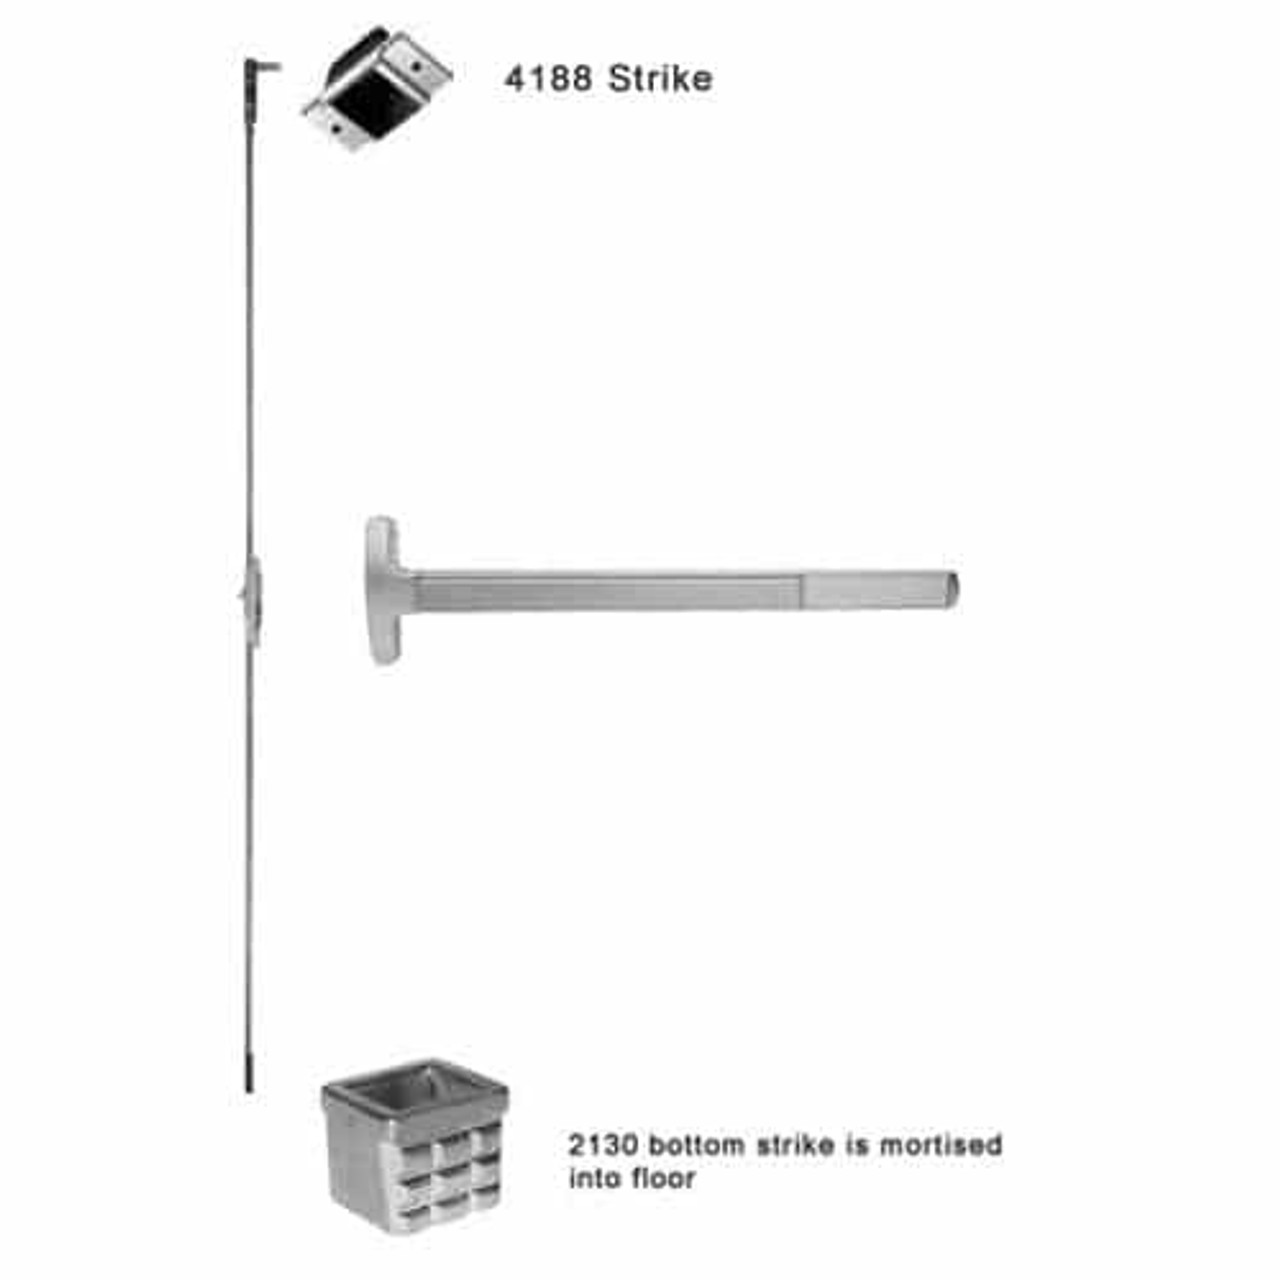 F-24-C-L-DT-DANE-US15-3-RHR Falcon 24 Series Fire Rated Concealed Vertical Rod Device 712L-DT Dane Lever with Dummy Trim in Satin Nickel